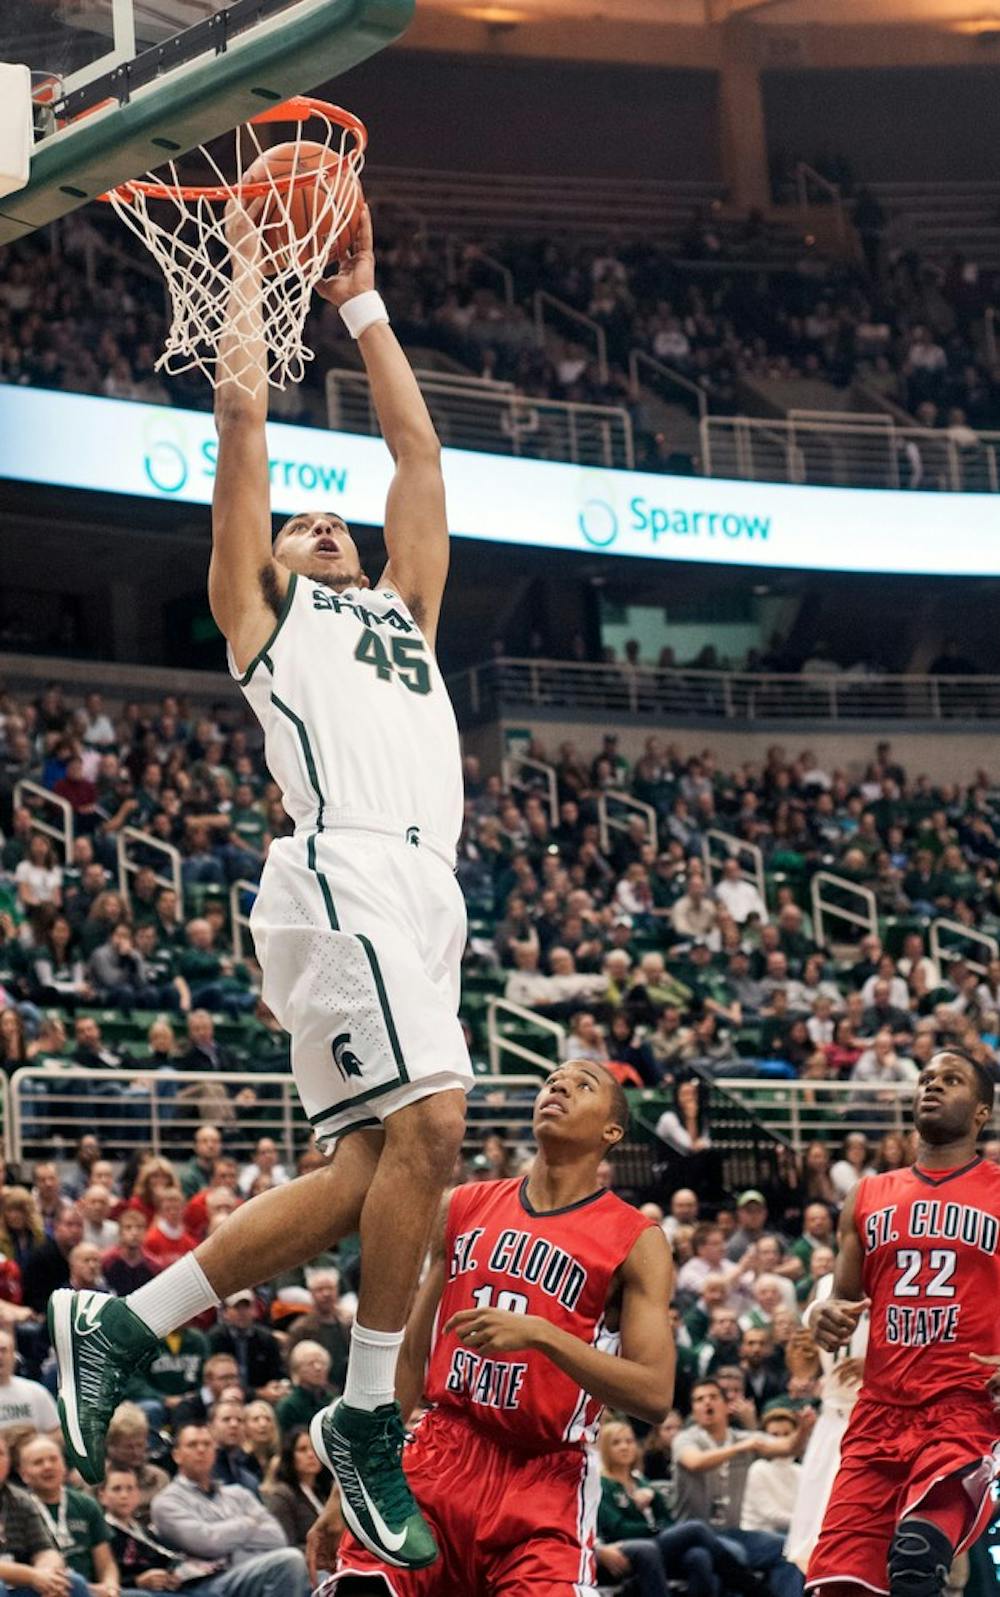 Freshman guard Denzel Valentine jumps for an alley-oop but was unable to score Nov. 2, 2012, at Breslin Center. The Spartans defeated St. Cloud State 62-49 in the second and final exhibition game of the season. Adam Toolin/The State News